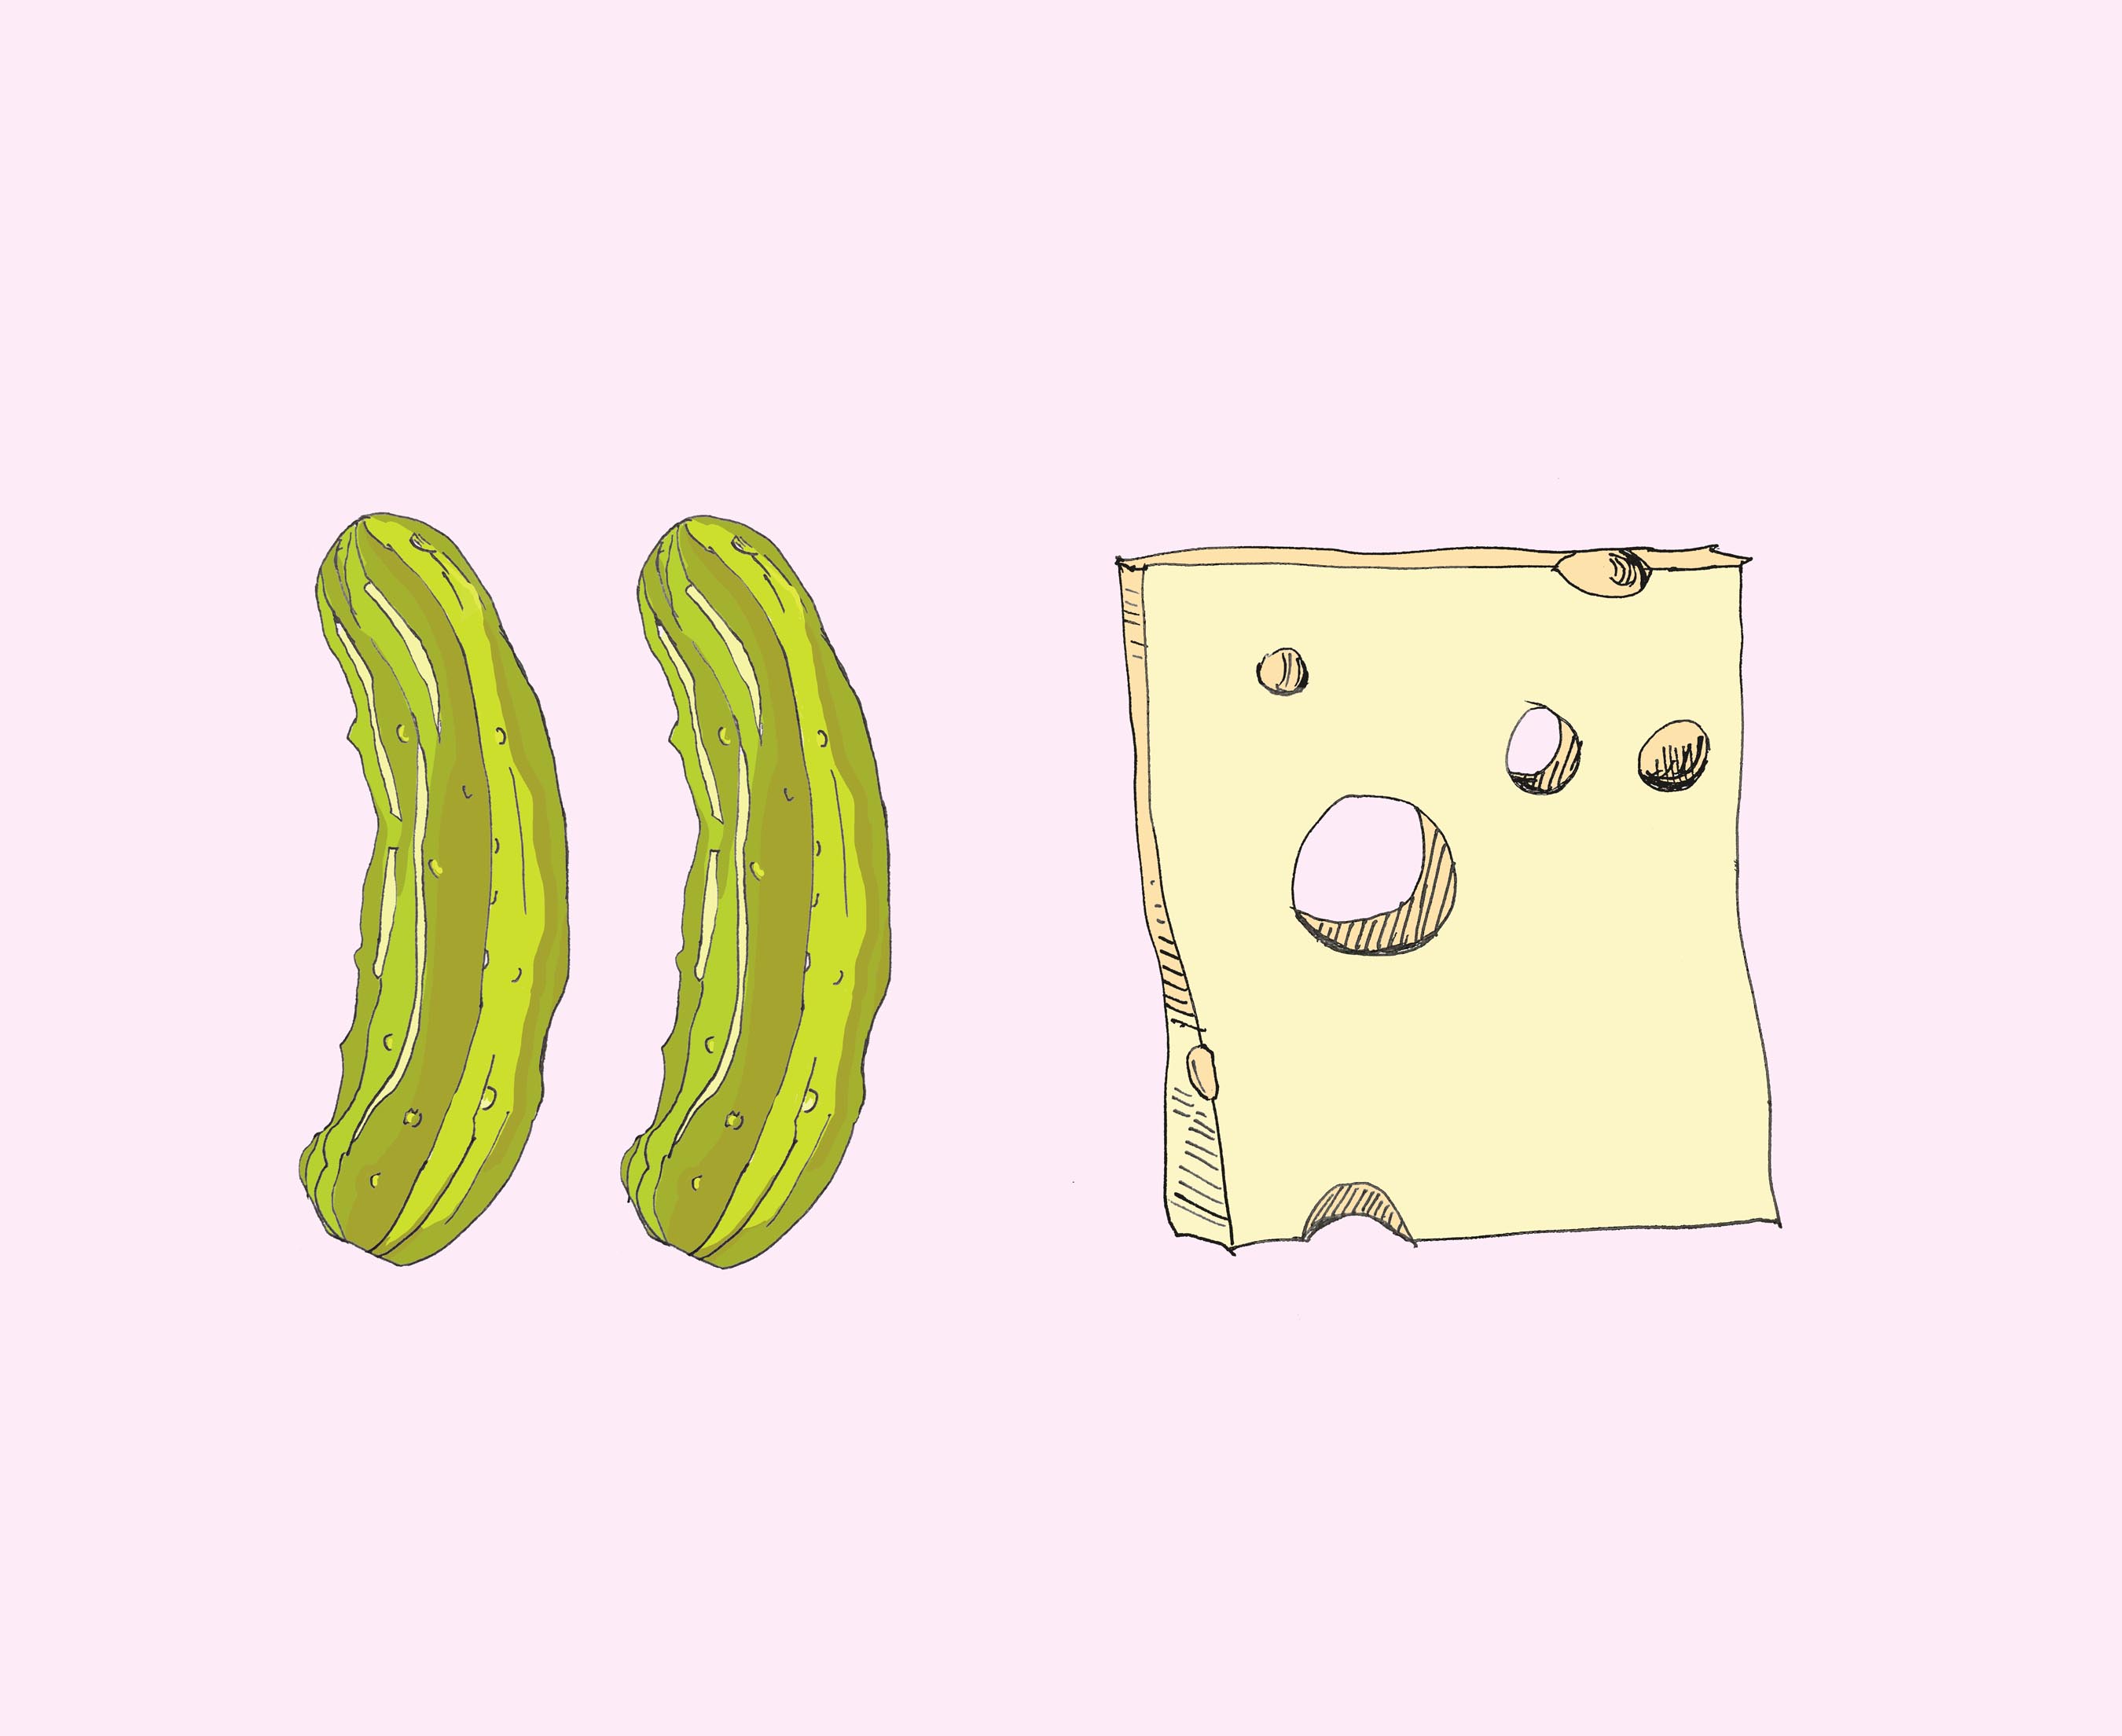 art every day number 416 / illustration / pickles & cheese